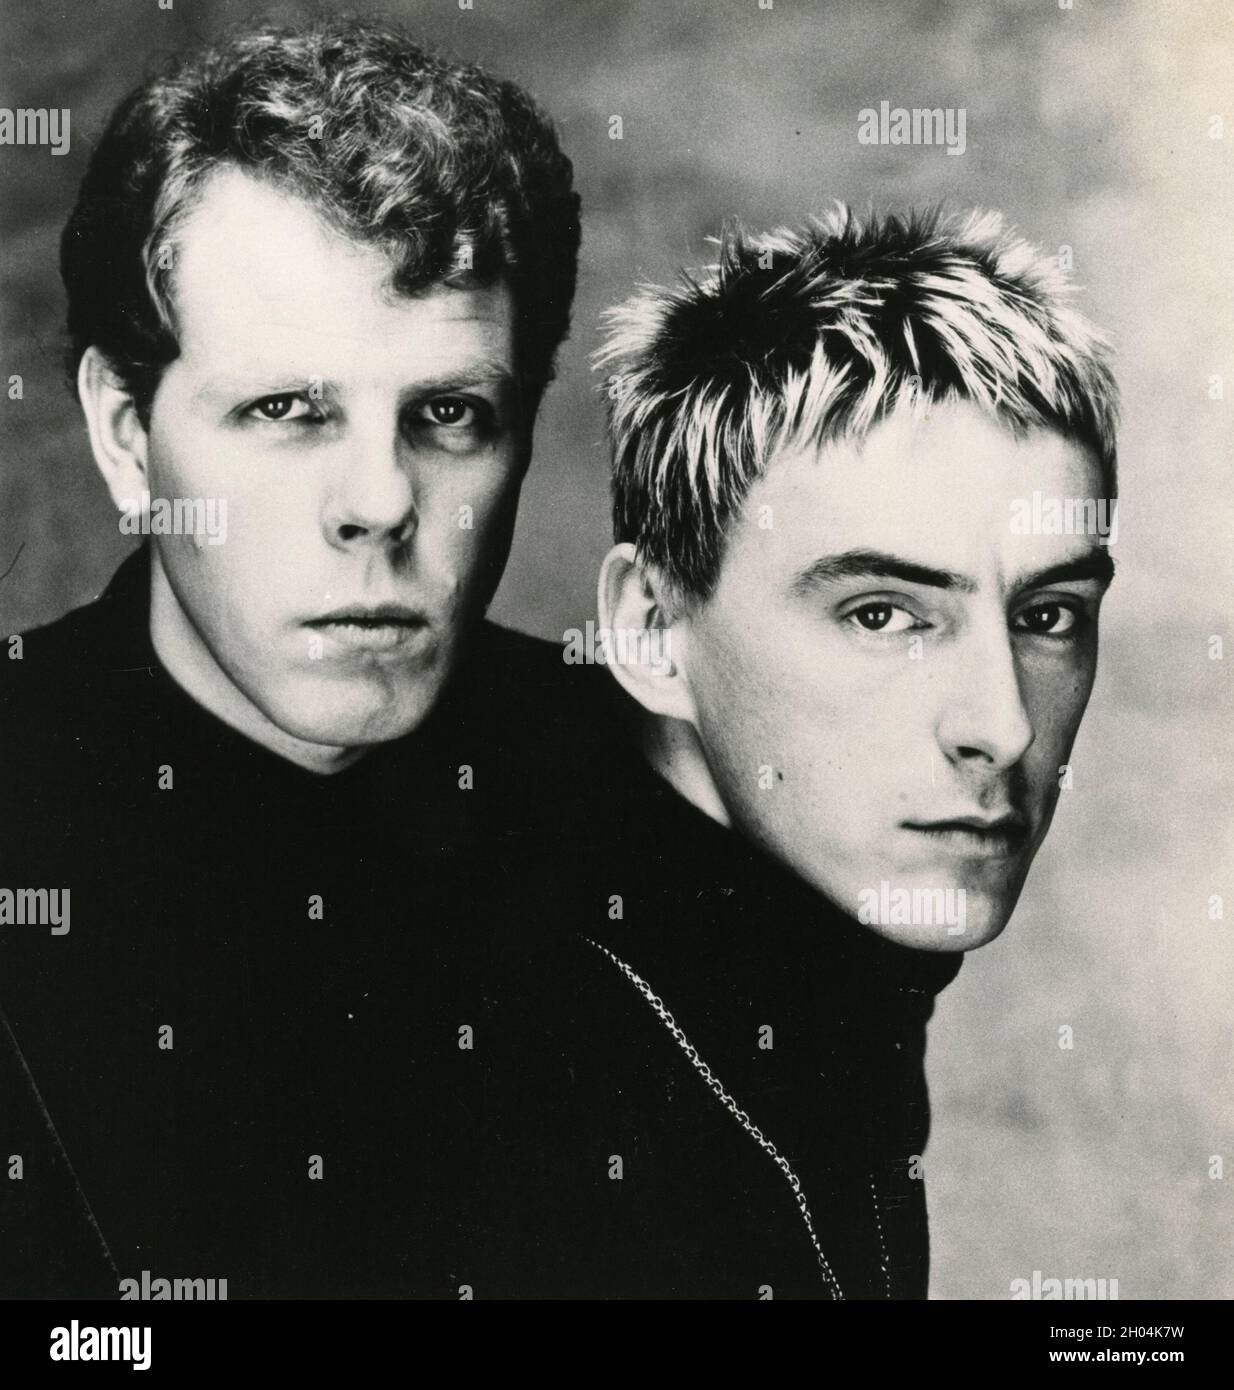 British band The Style Council, 1980s Stock Photo - Alamy